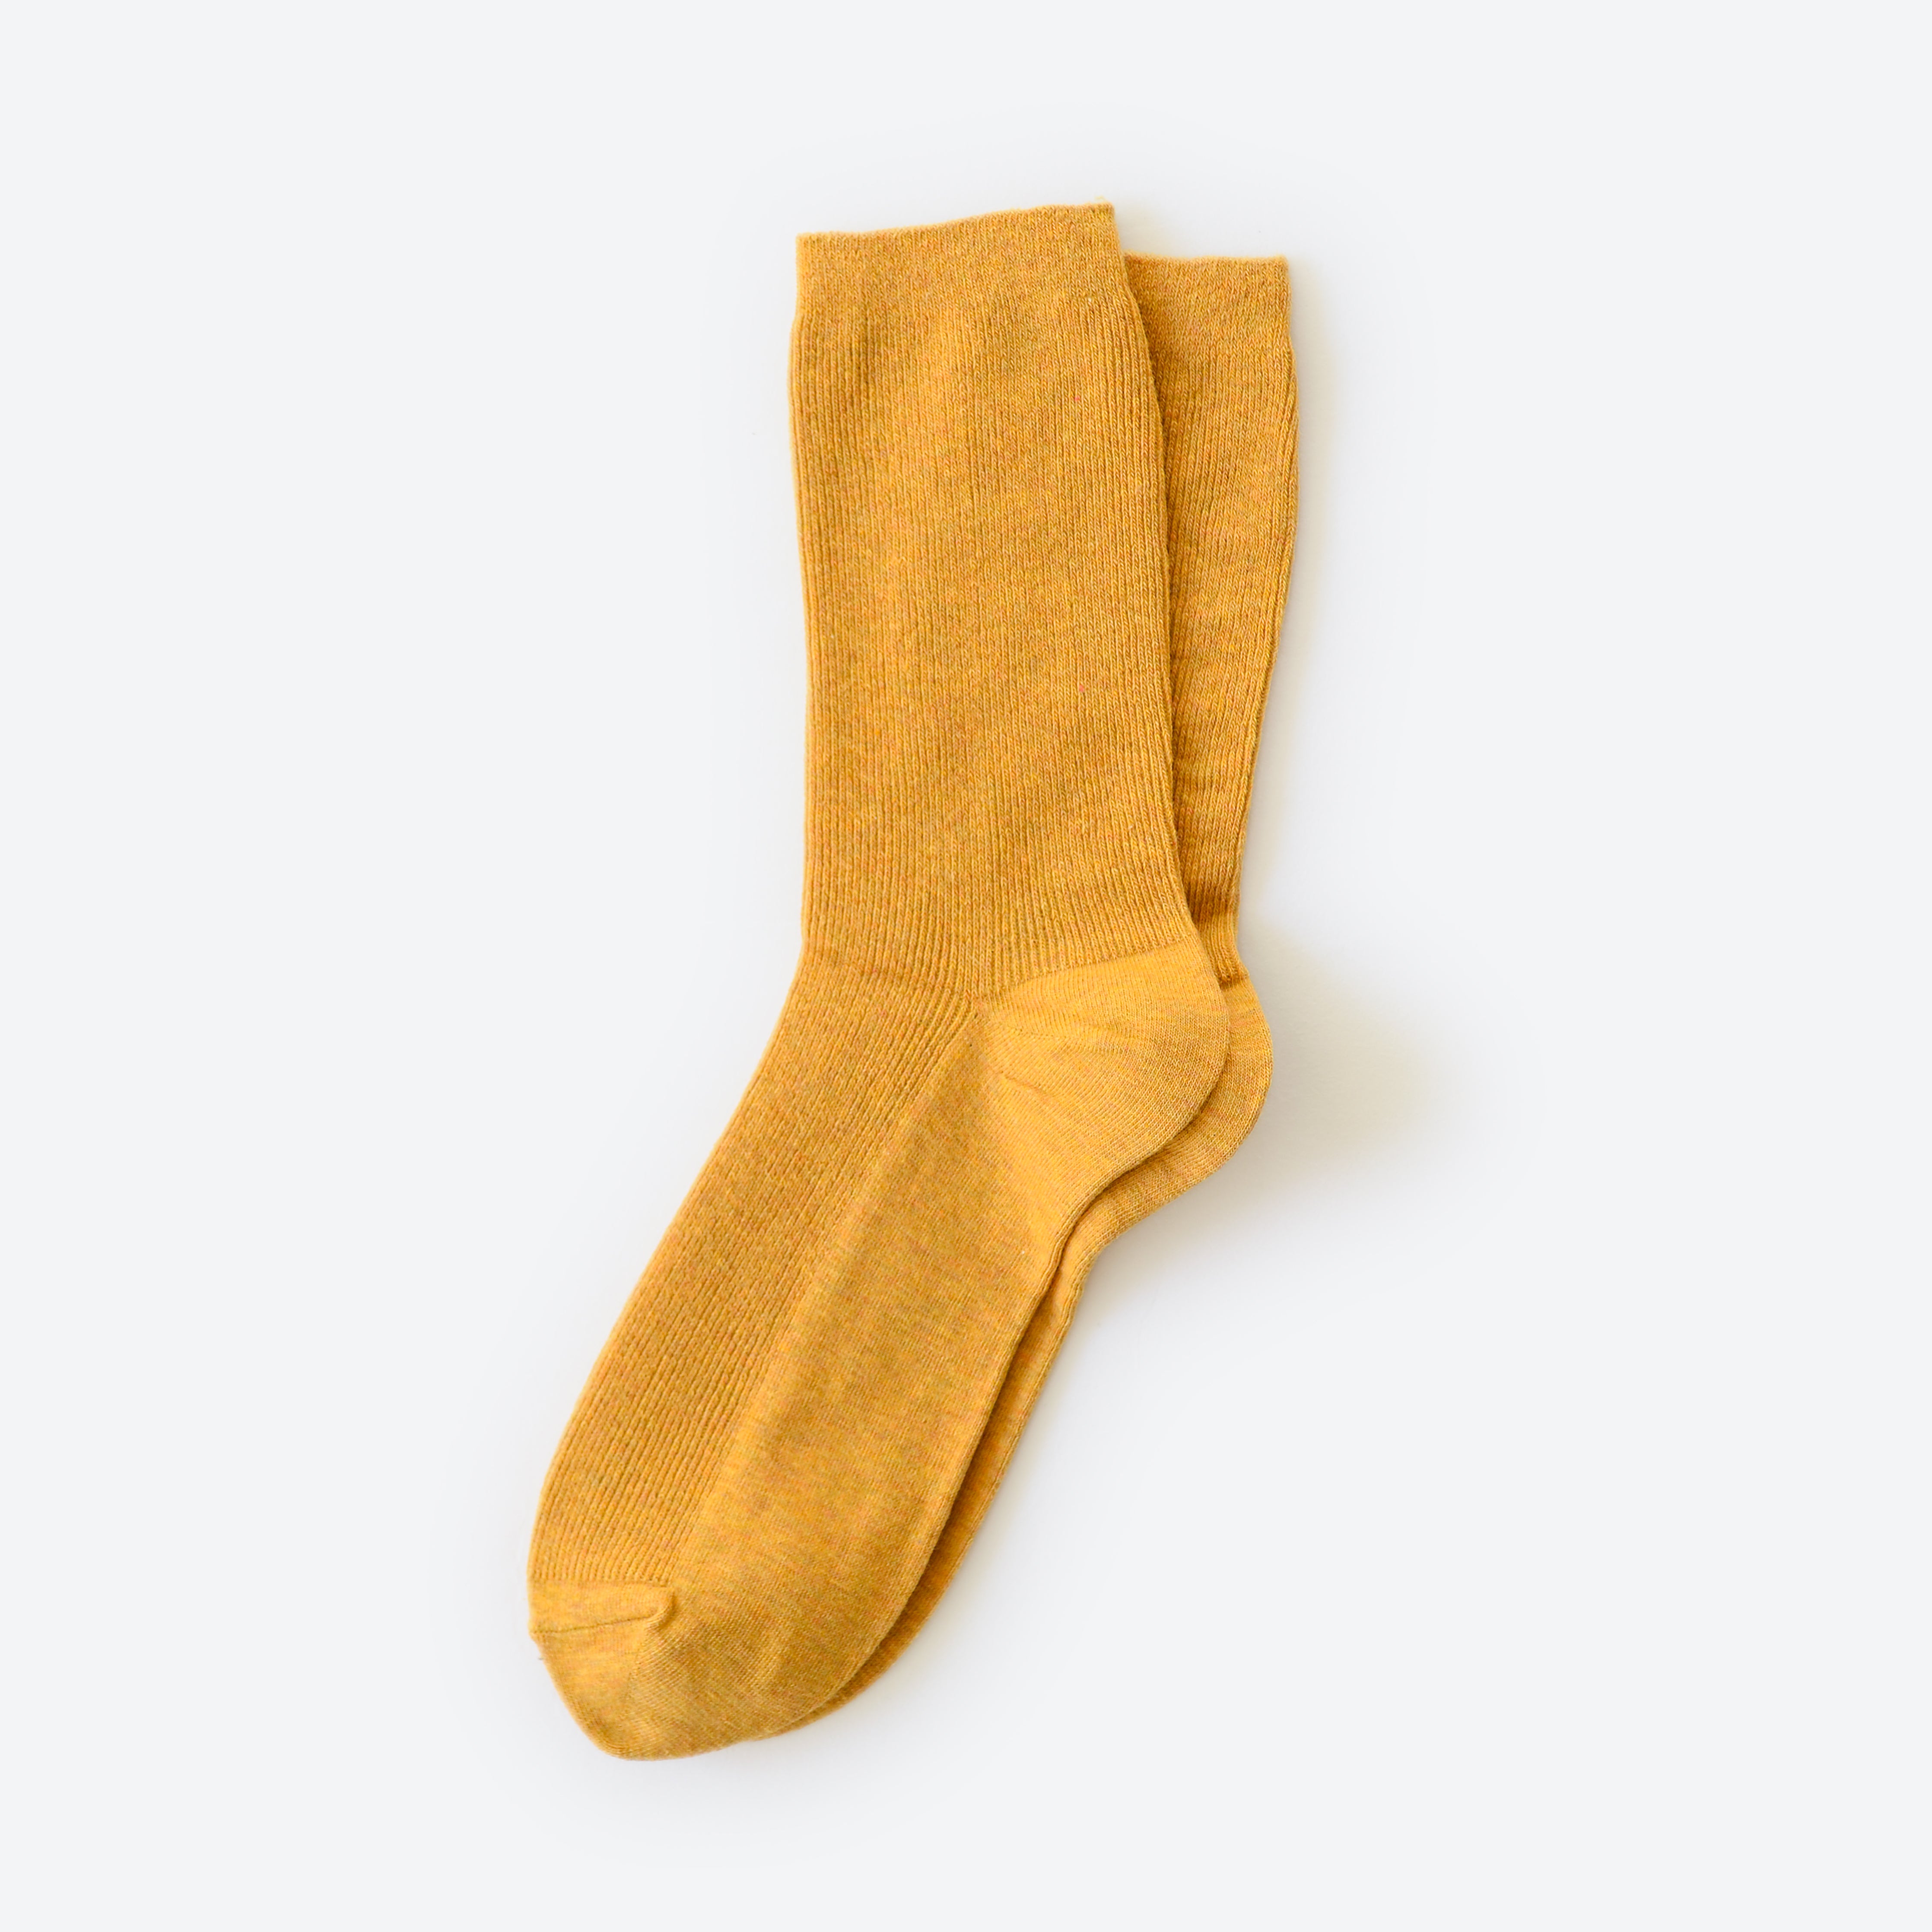 Hooray Sock Co.&#39;s Goldenrod Crew Socks: Everyday Cotton with sunshine-y style. Unisex design, shorter crew length. 80% cotton, 20% spandex. Made in South Korea. Small (Women&#39;s 4-10).